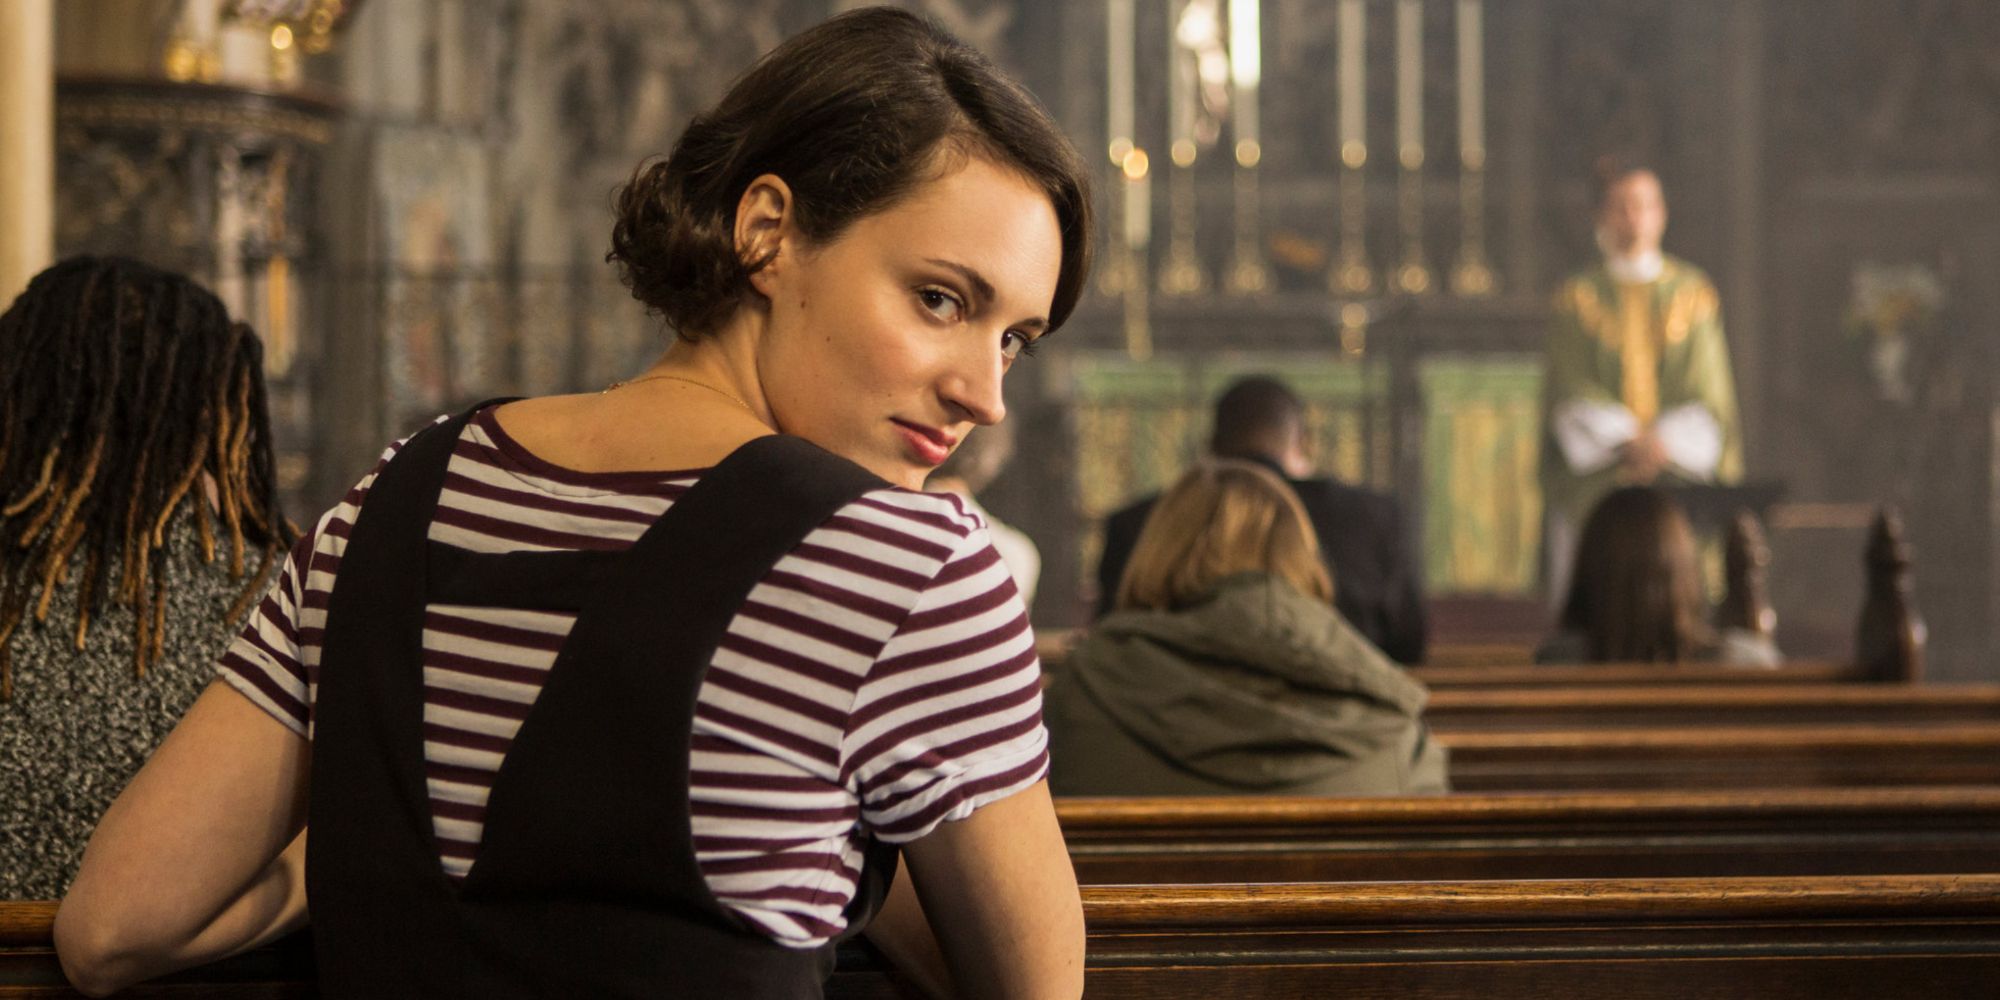 Fleabag at church turning around to talk to the camera in Fleabag.